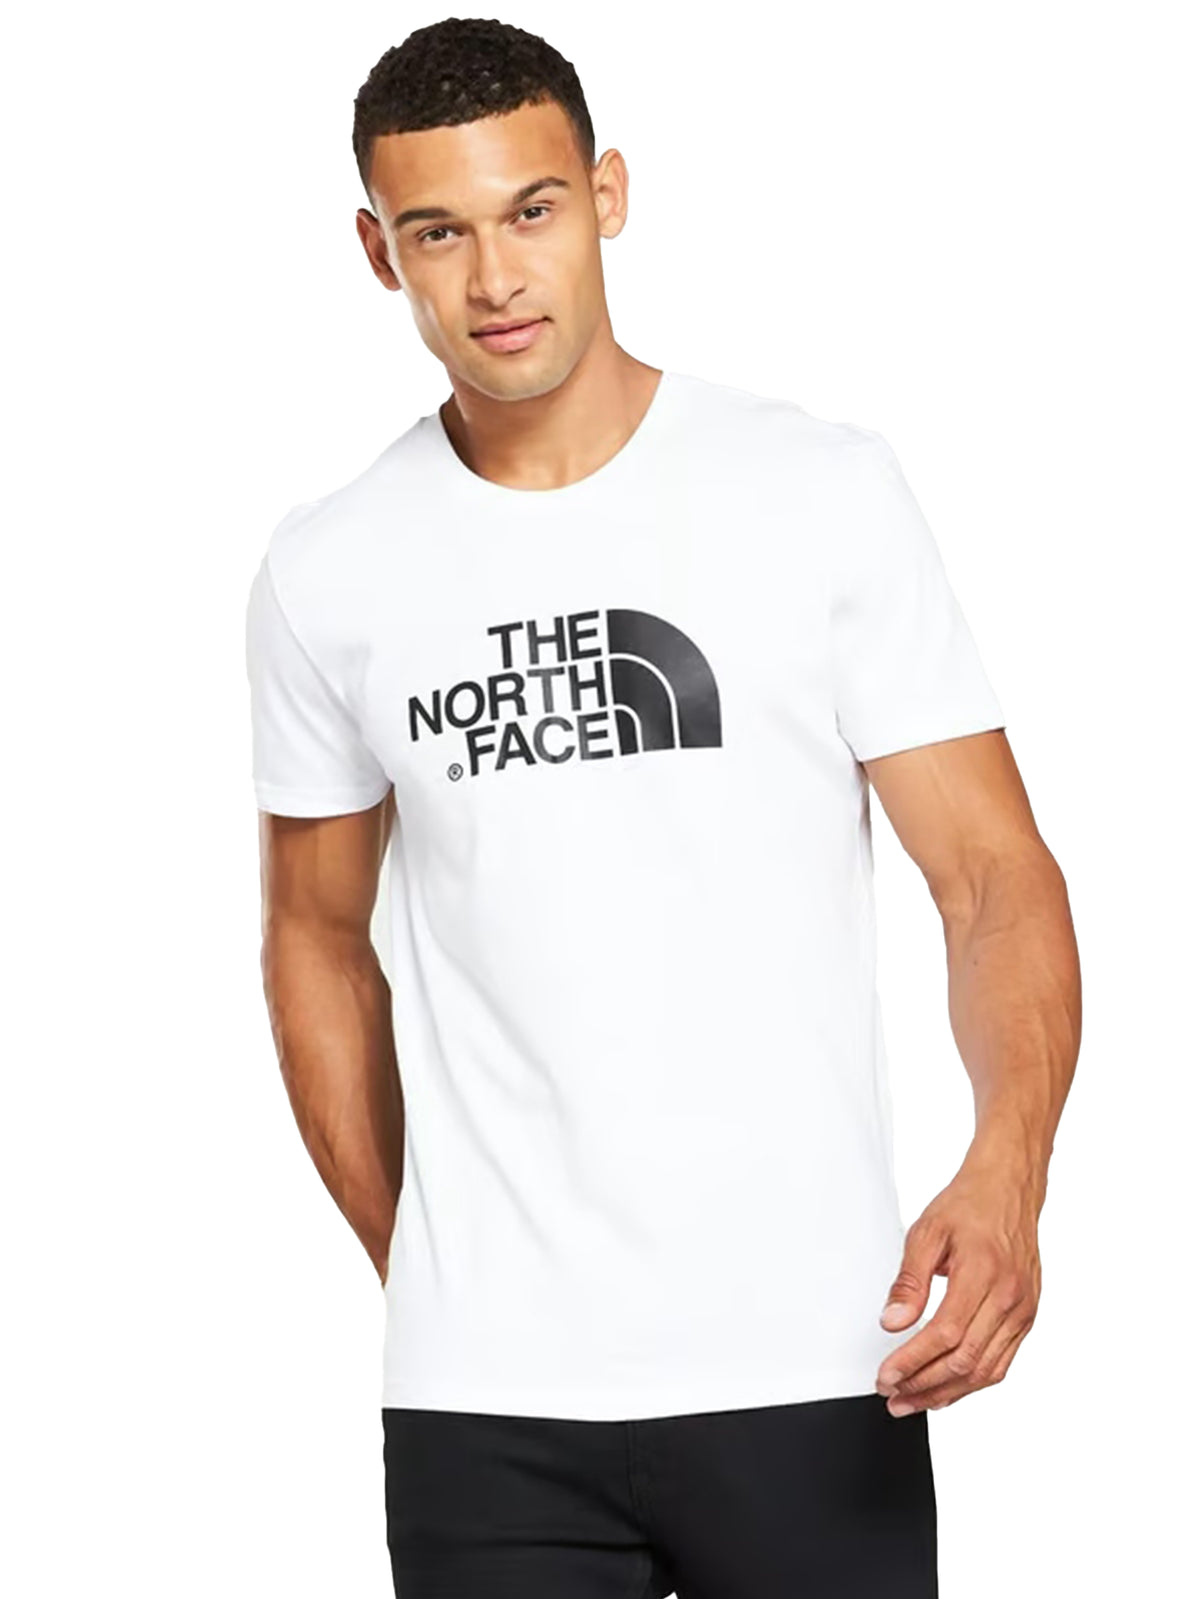 NF_TSHIRT_MK01 The North Face | Mens Graphic Easy T-shirt THE NORTH FACE RAWDENIM